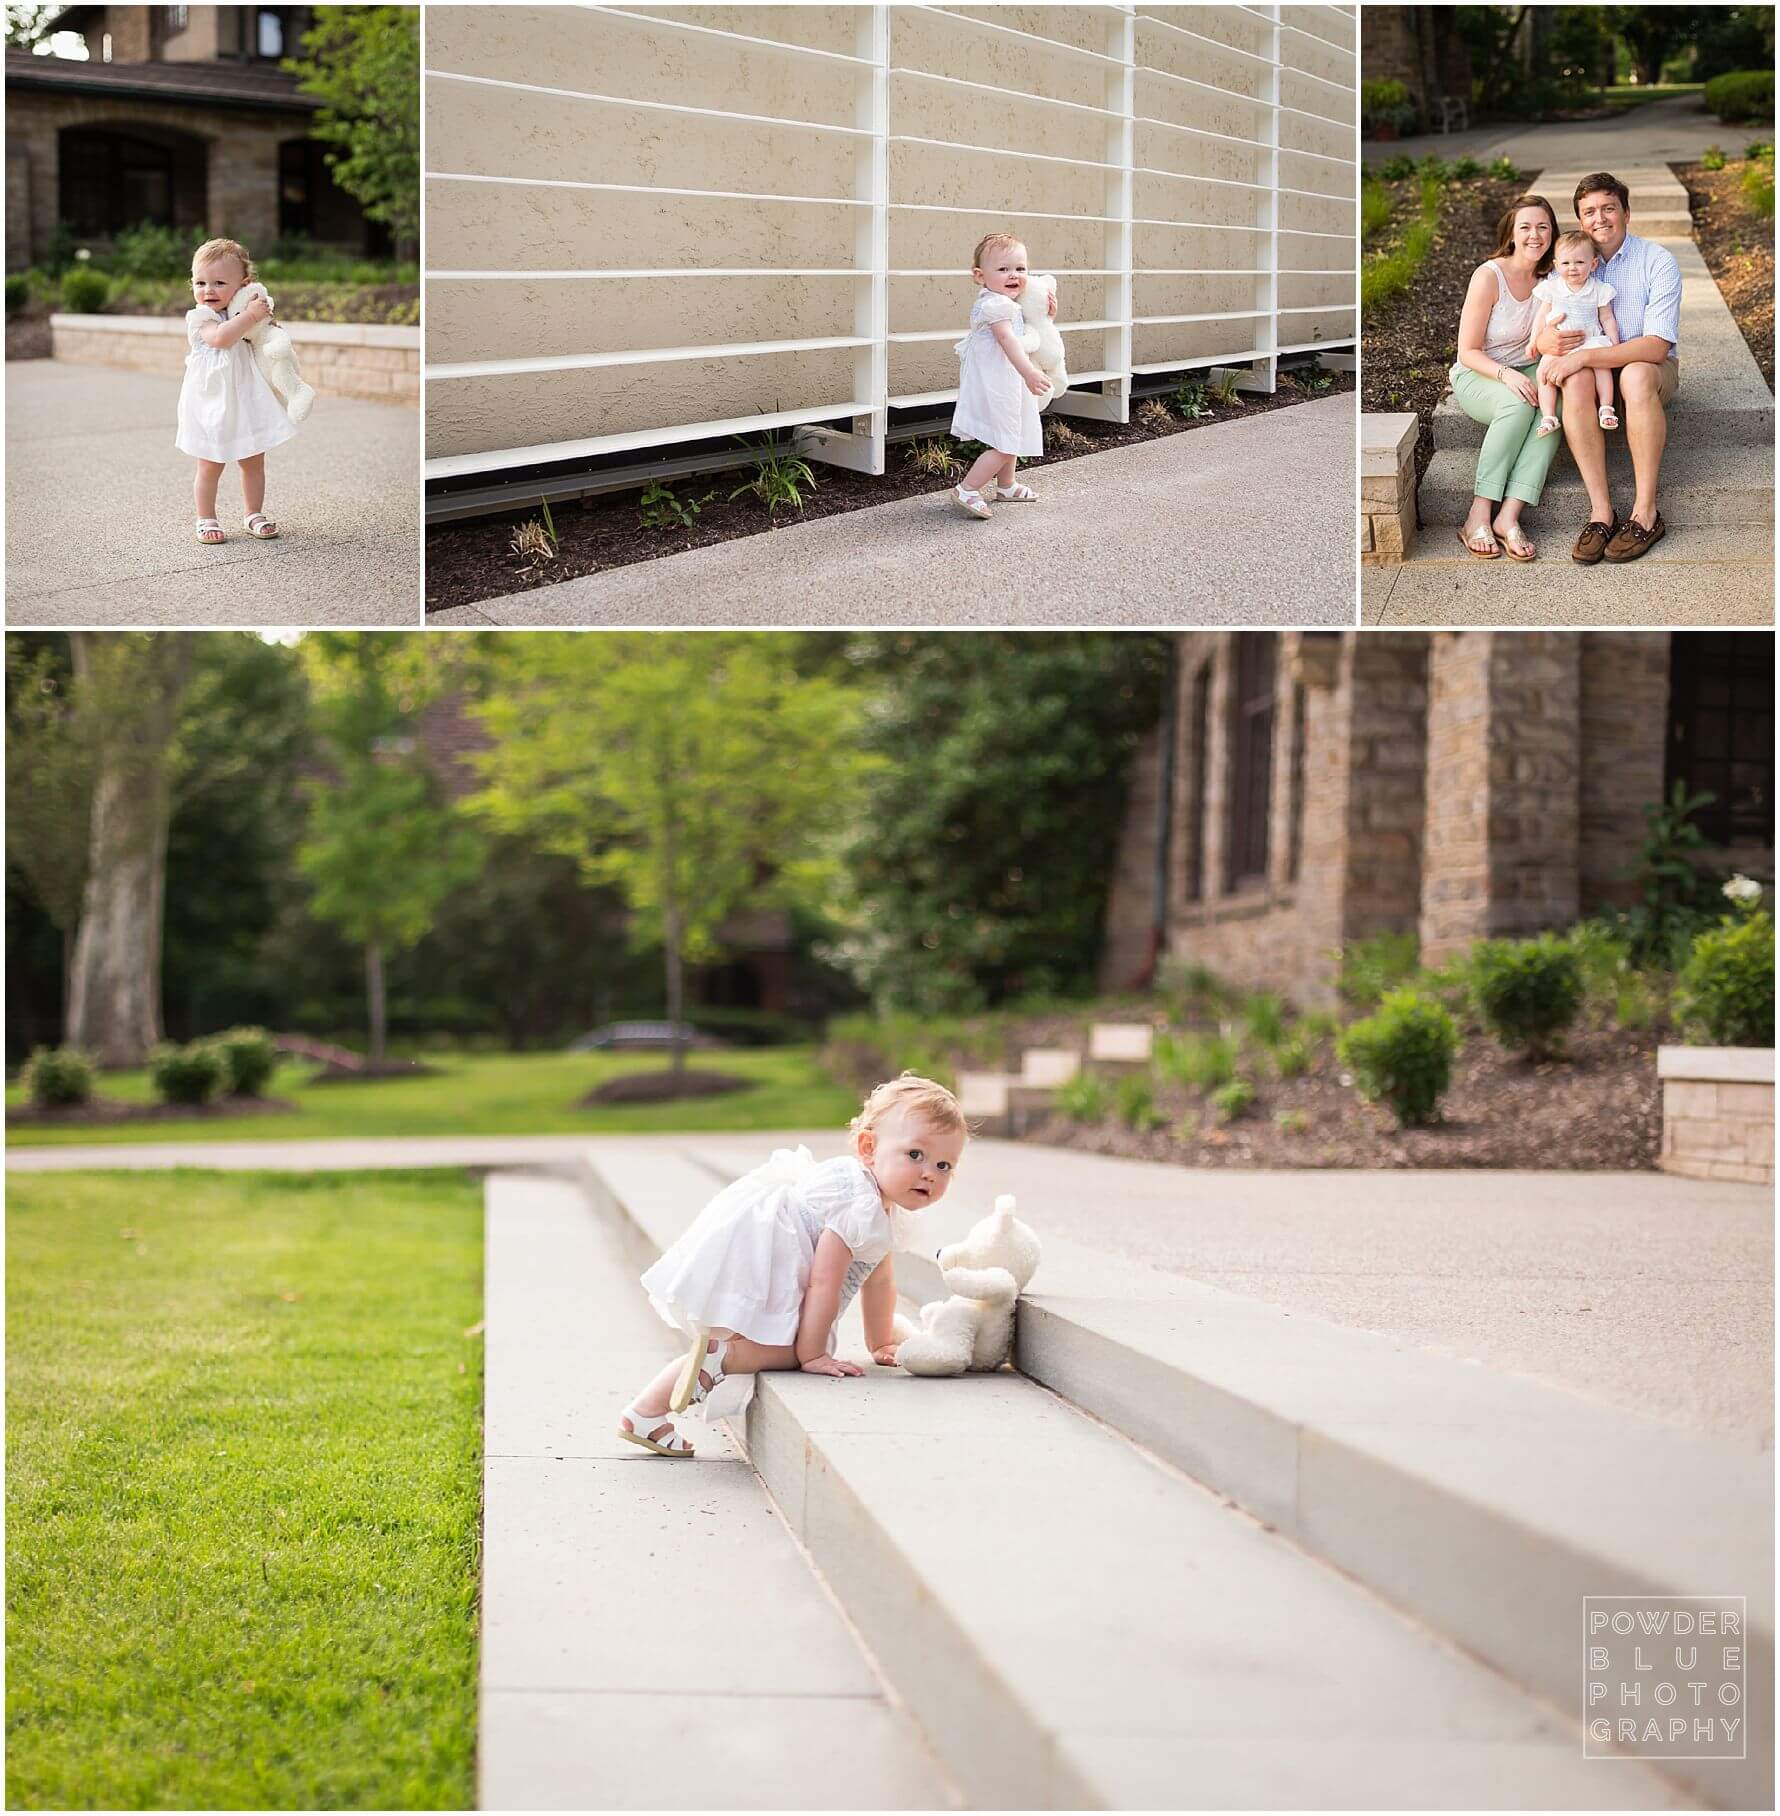 pittsburgh family photography session at frick art and historical center in pittsburgh, pa.  12 month old baby girl and family.